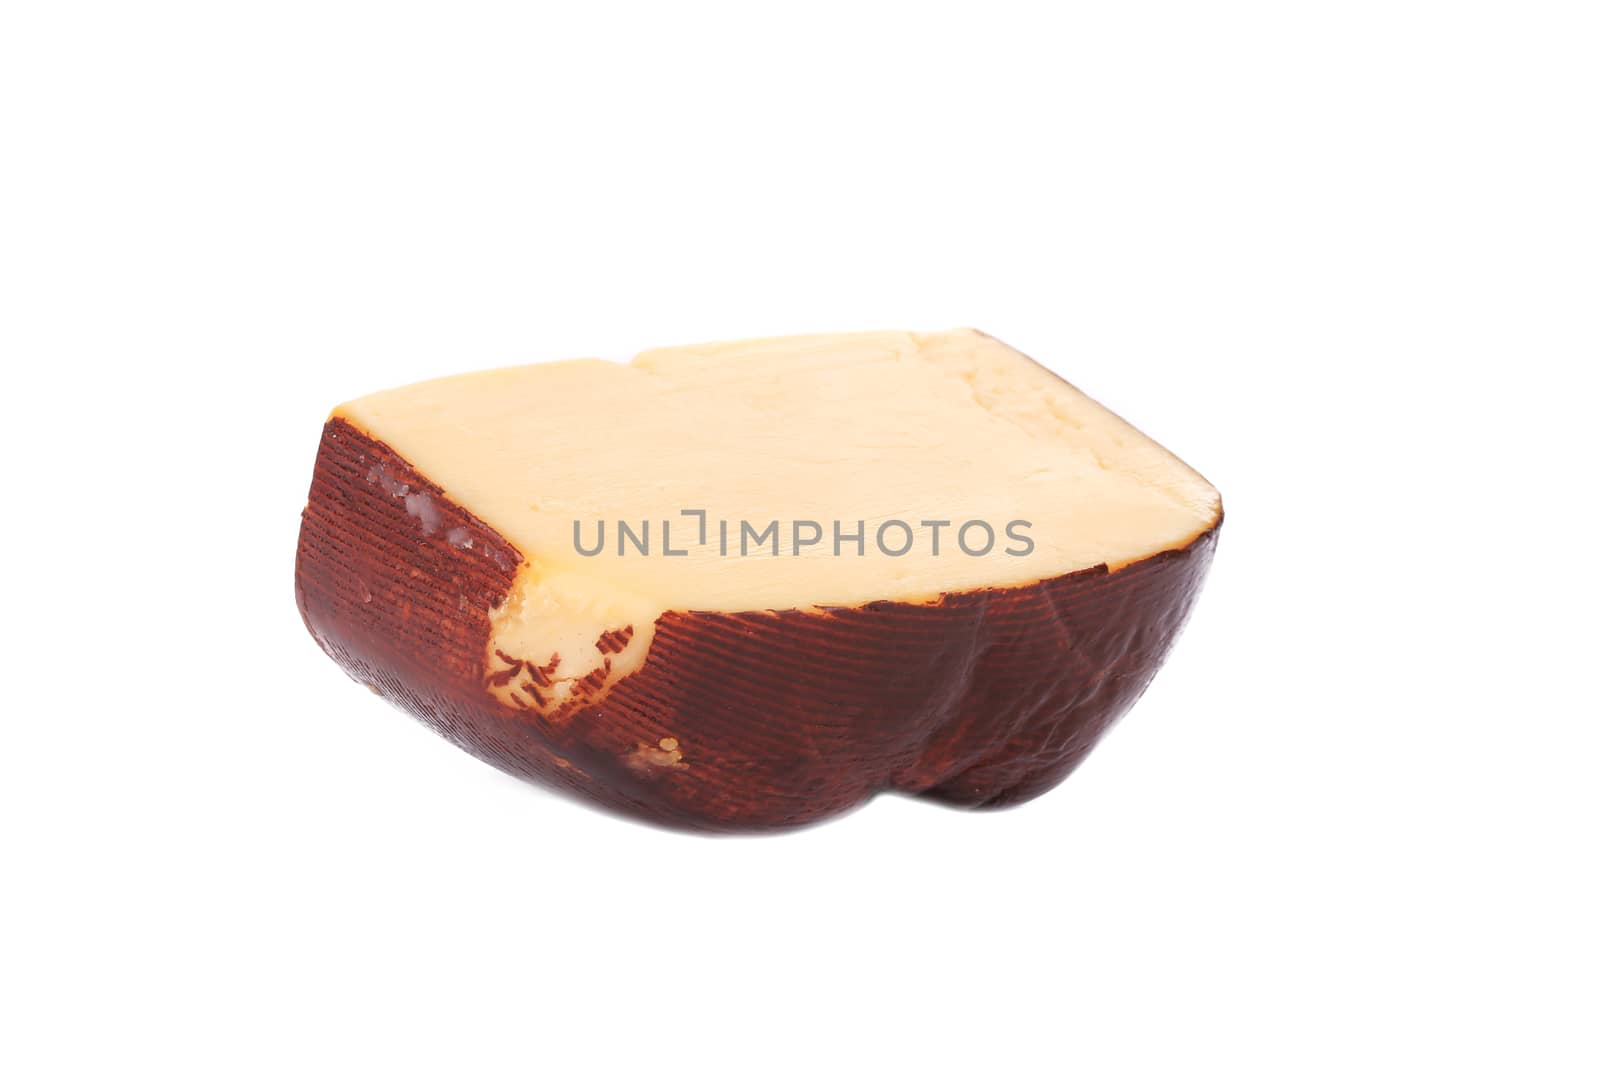 Piece of cheese. Isolated on a white background.